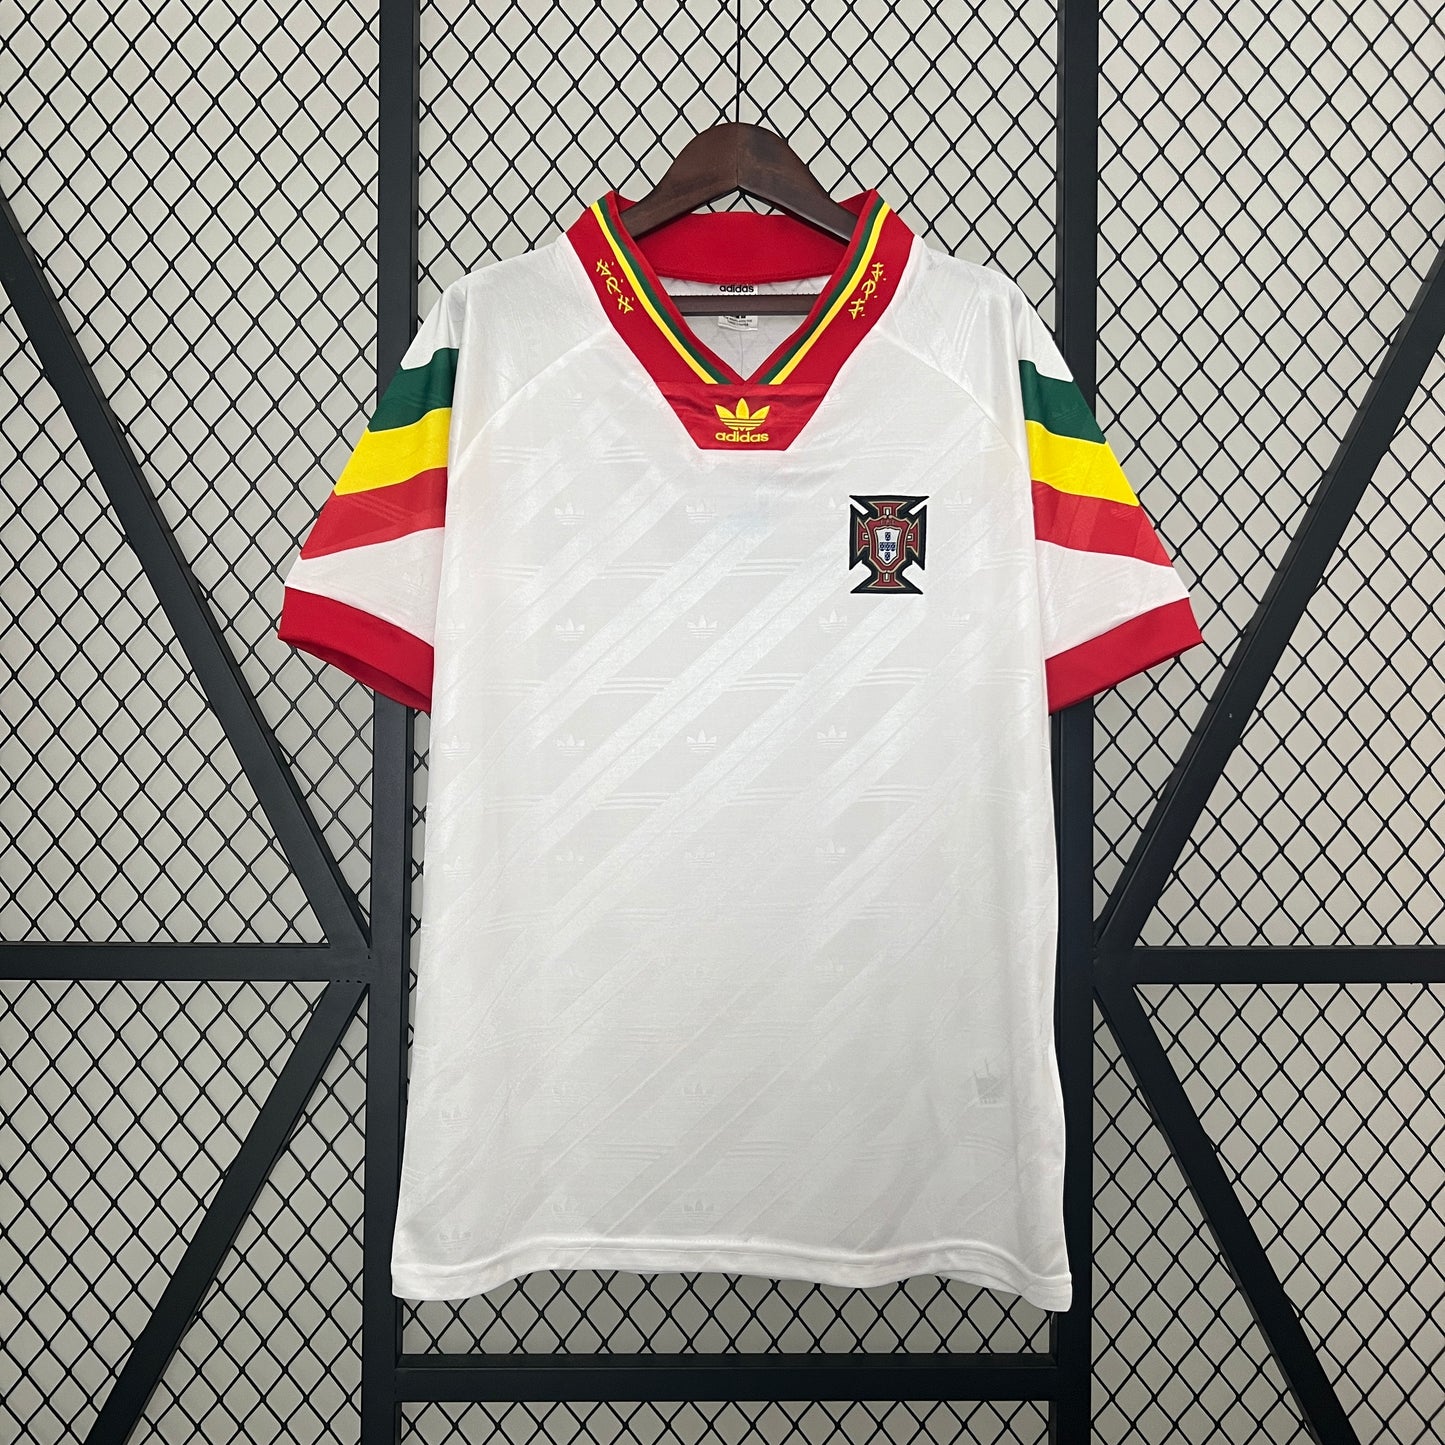 Portugal 91 away used